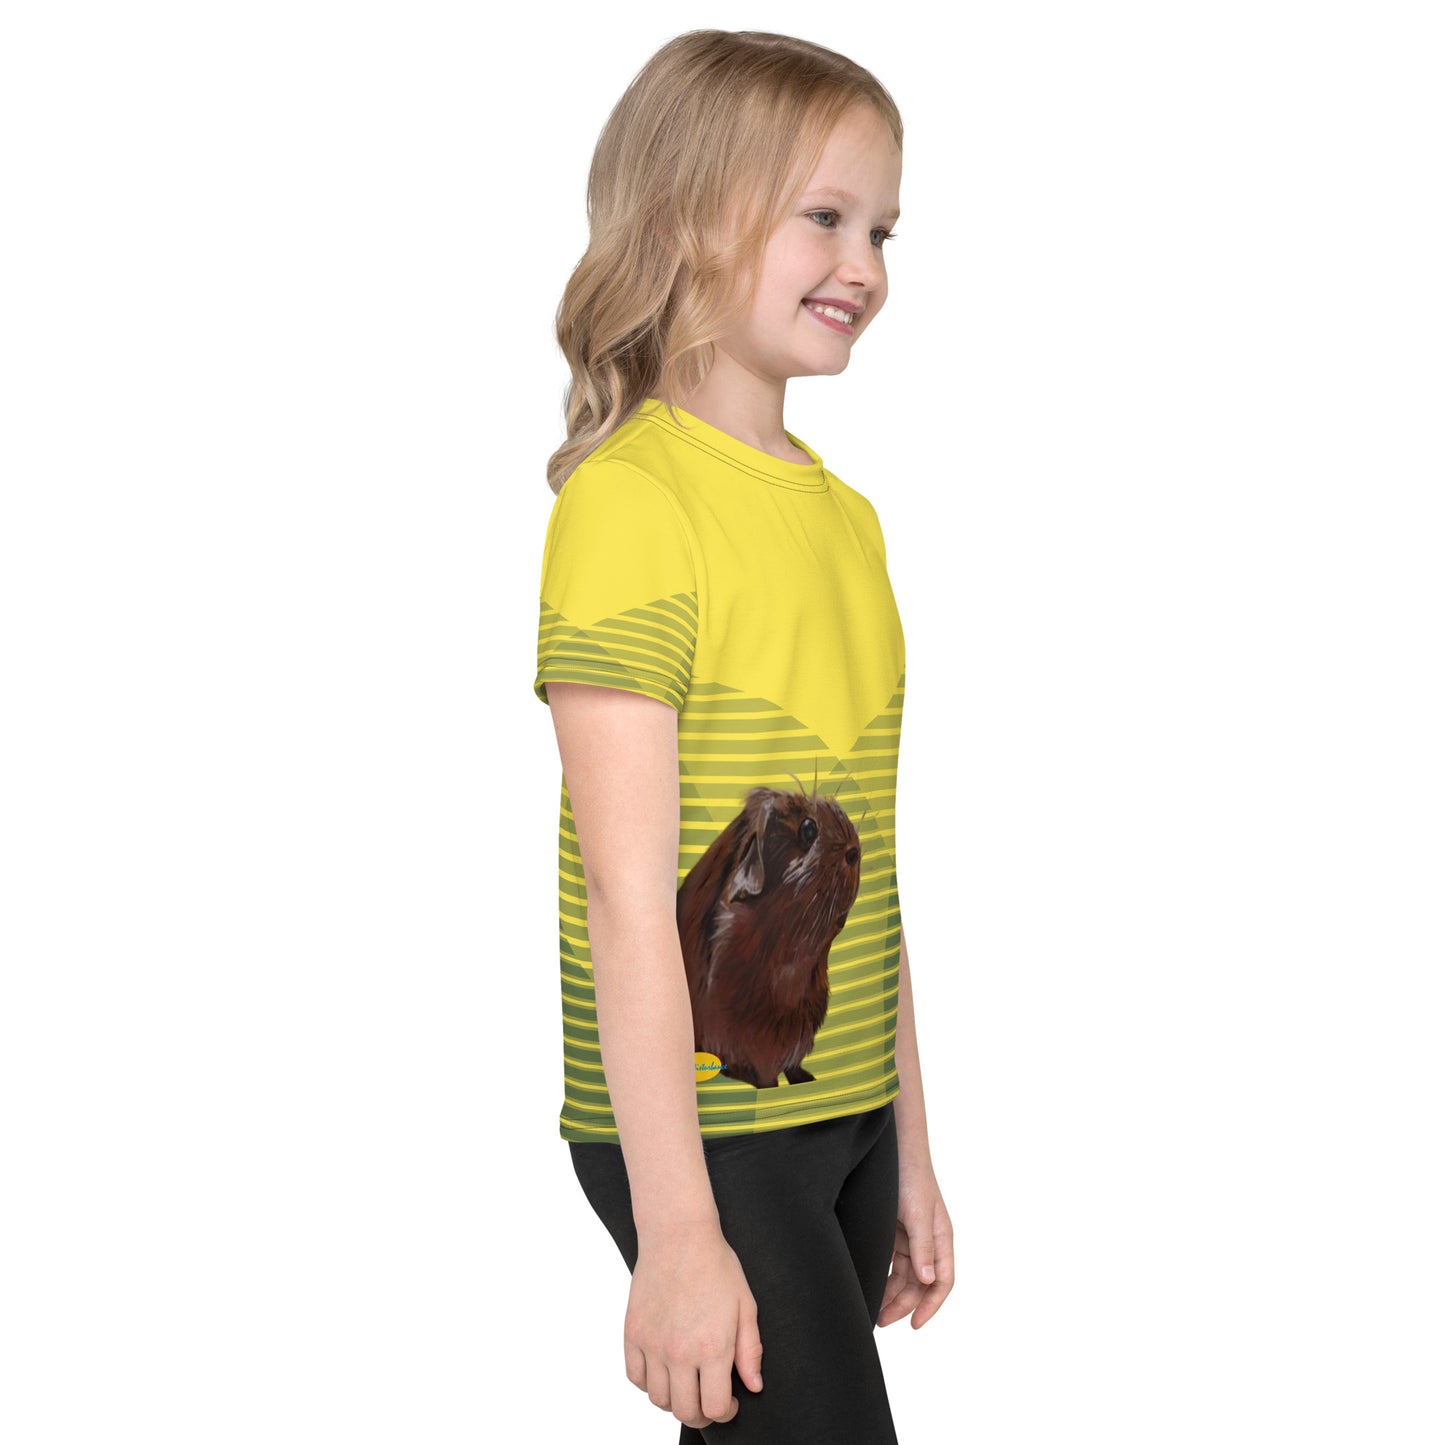 Gunther the Guinea Pig (Yellow and Green) Kids crew neck t-shirt